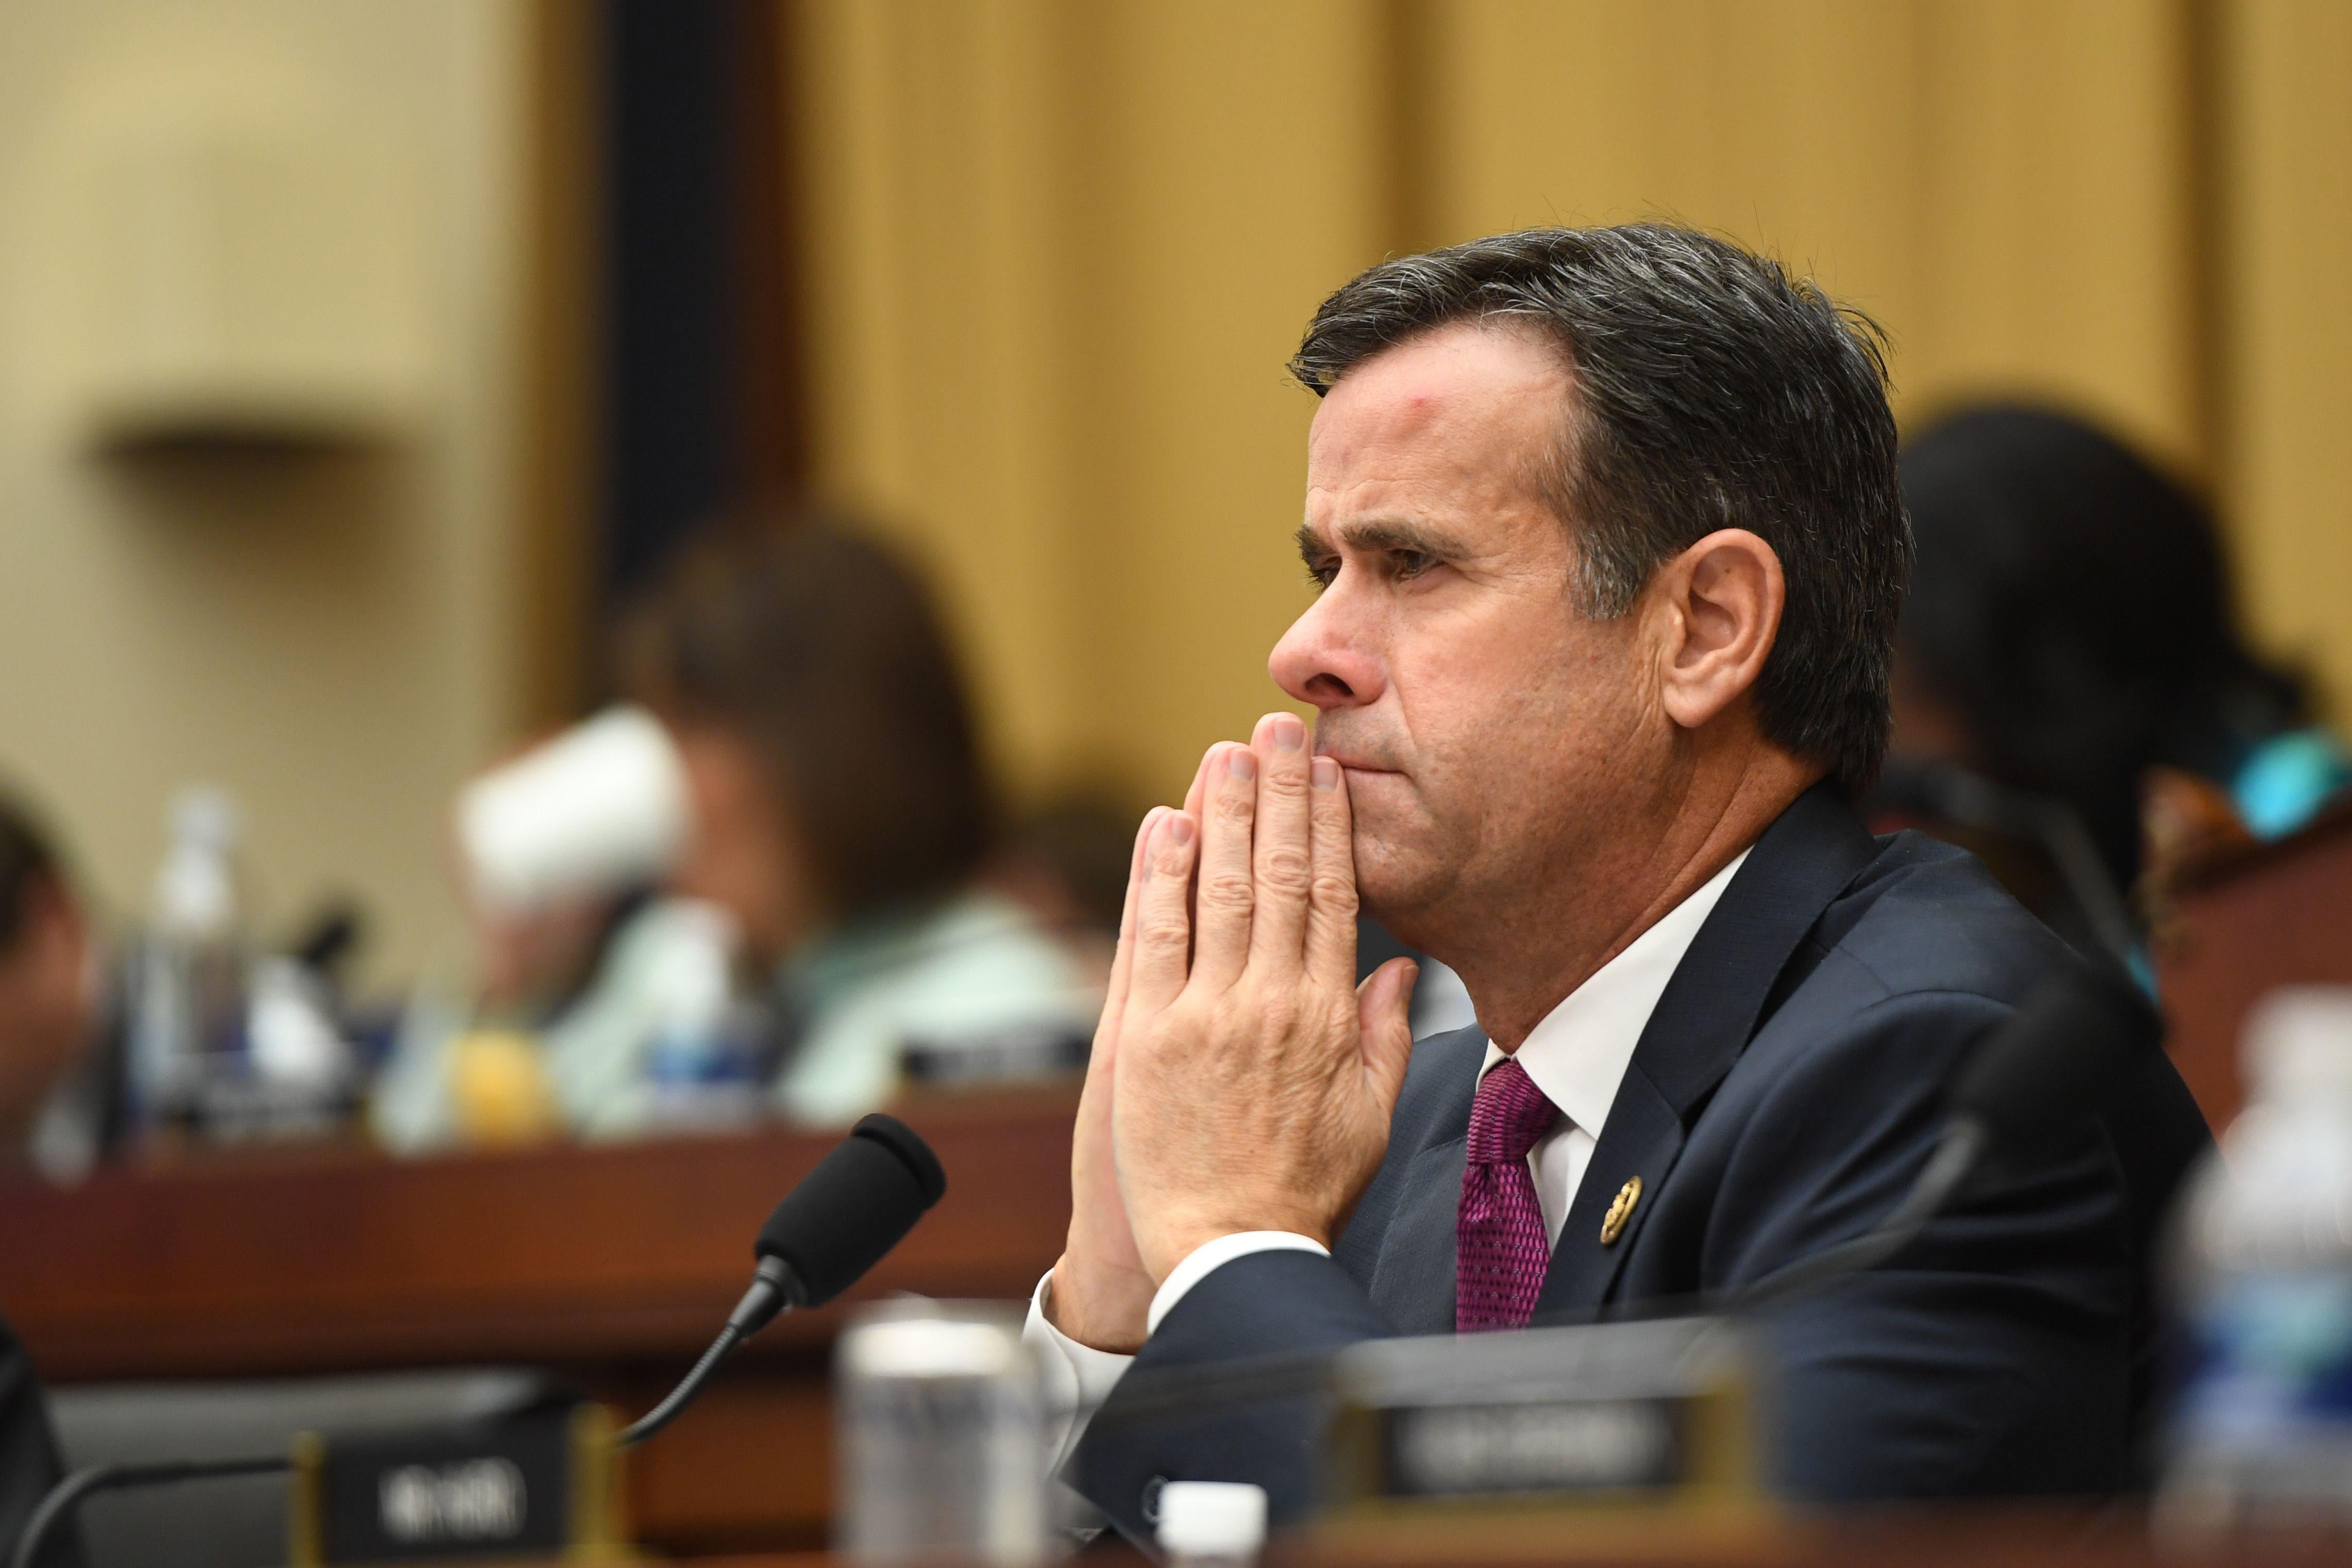 Rep. John Ratcliffe, Republican of Texas, listens as former Special Counsel Robert Mueller testifies in Washington, DC, on July 24, 2019.